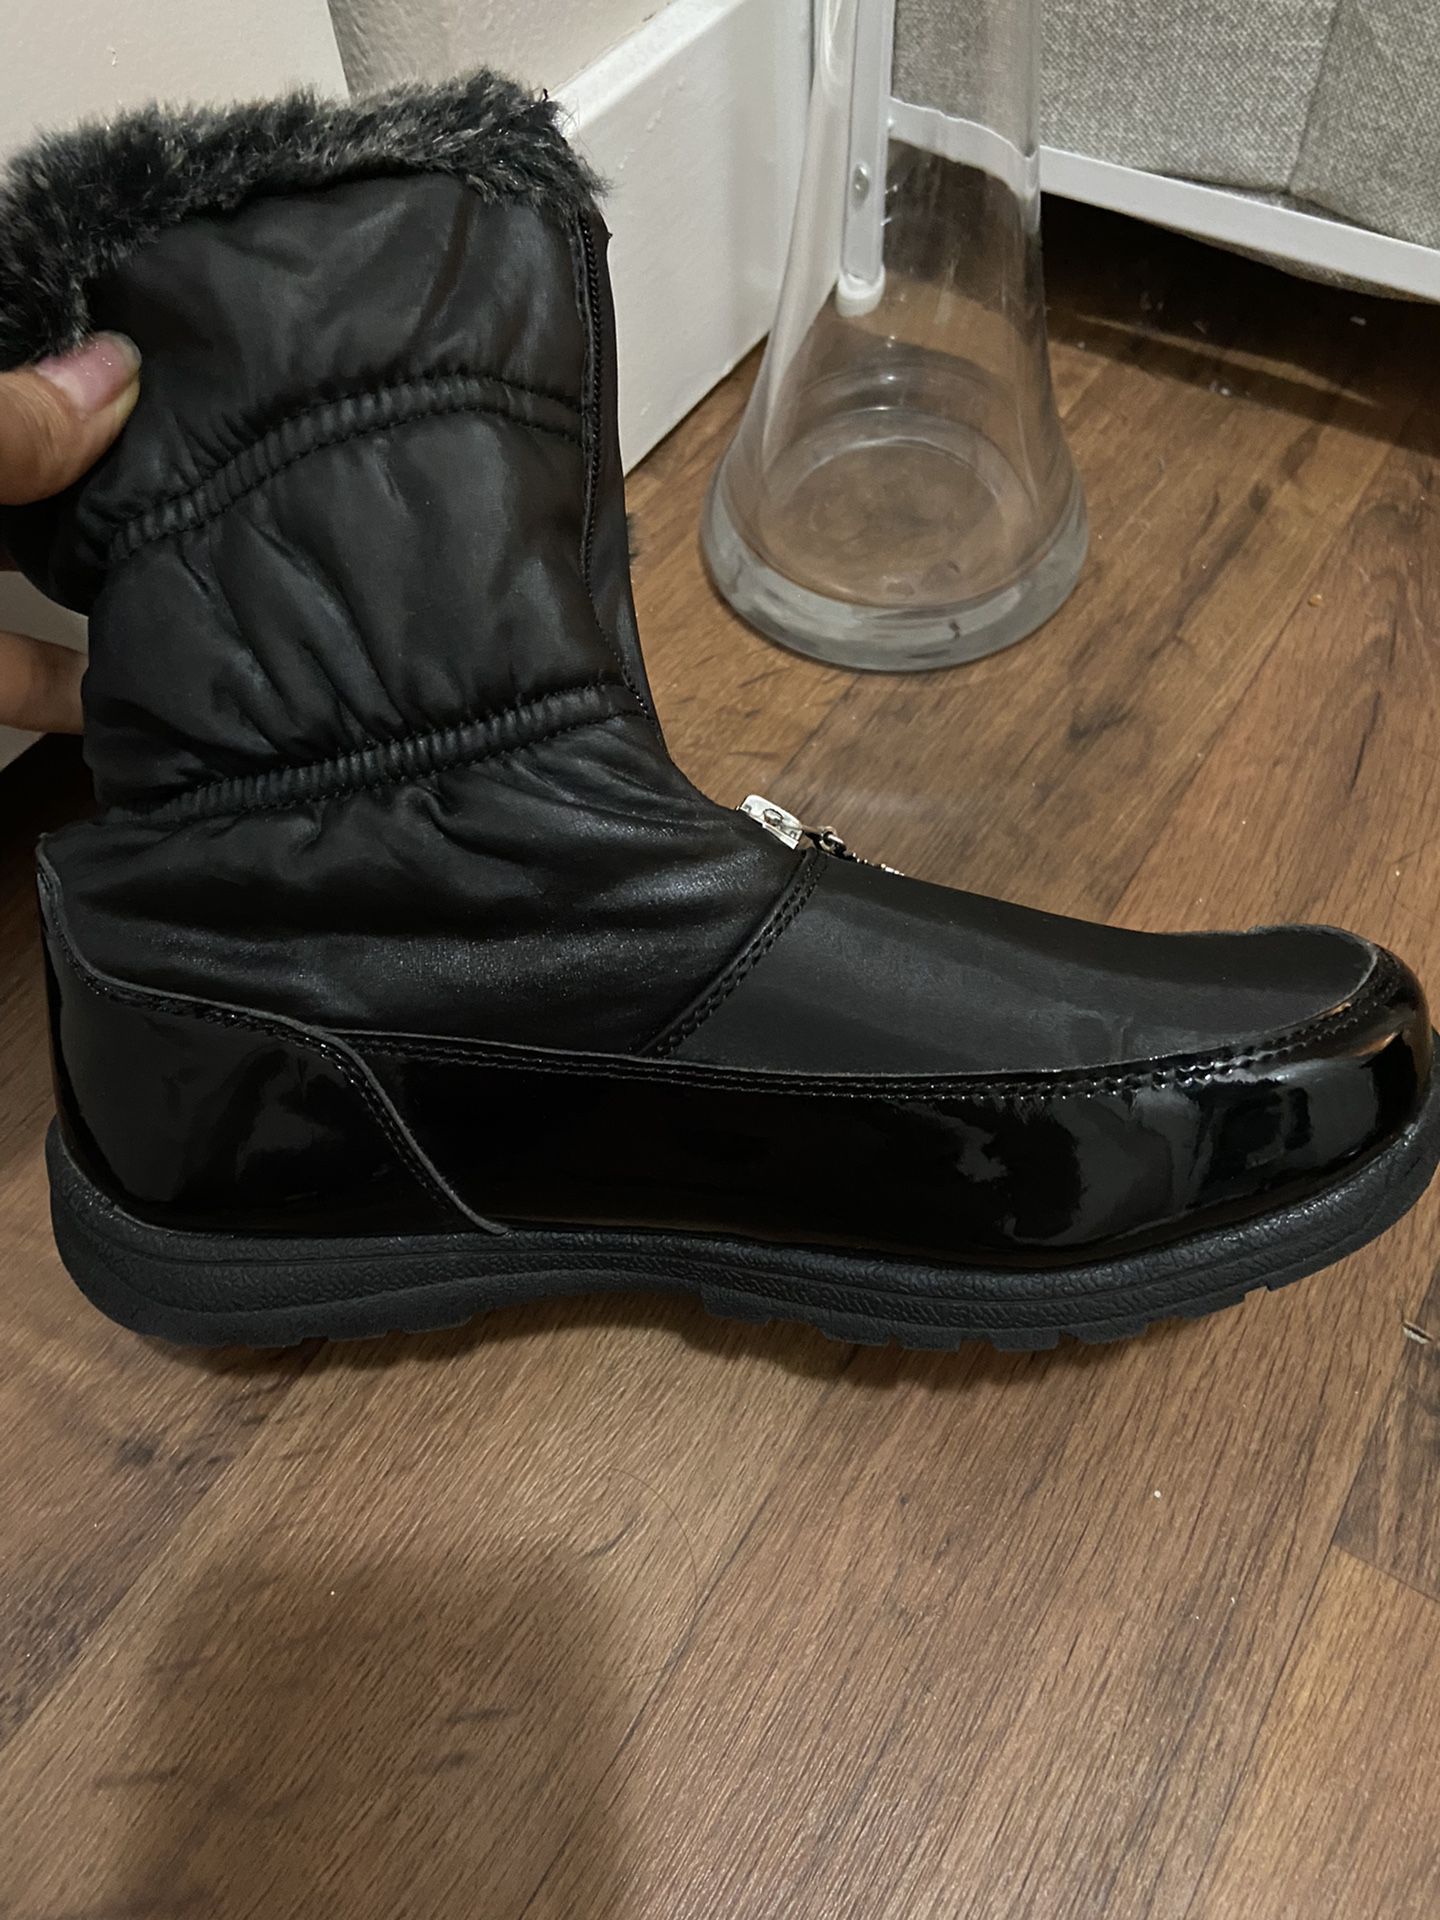 Black Worm Water Proof Boots Size 9